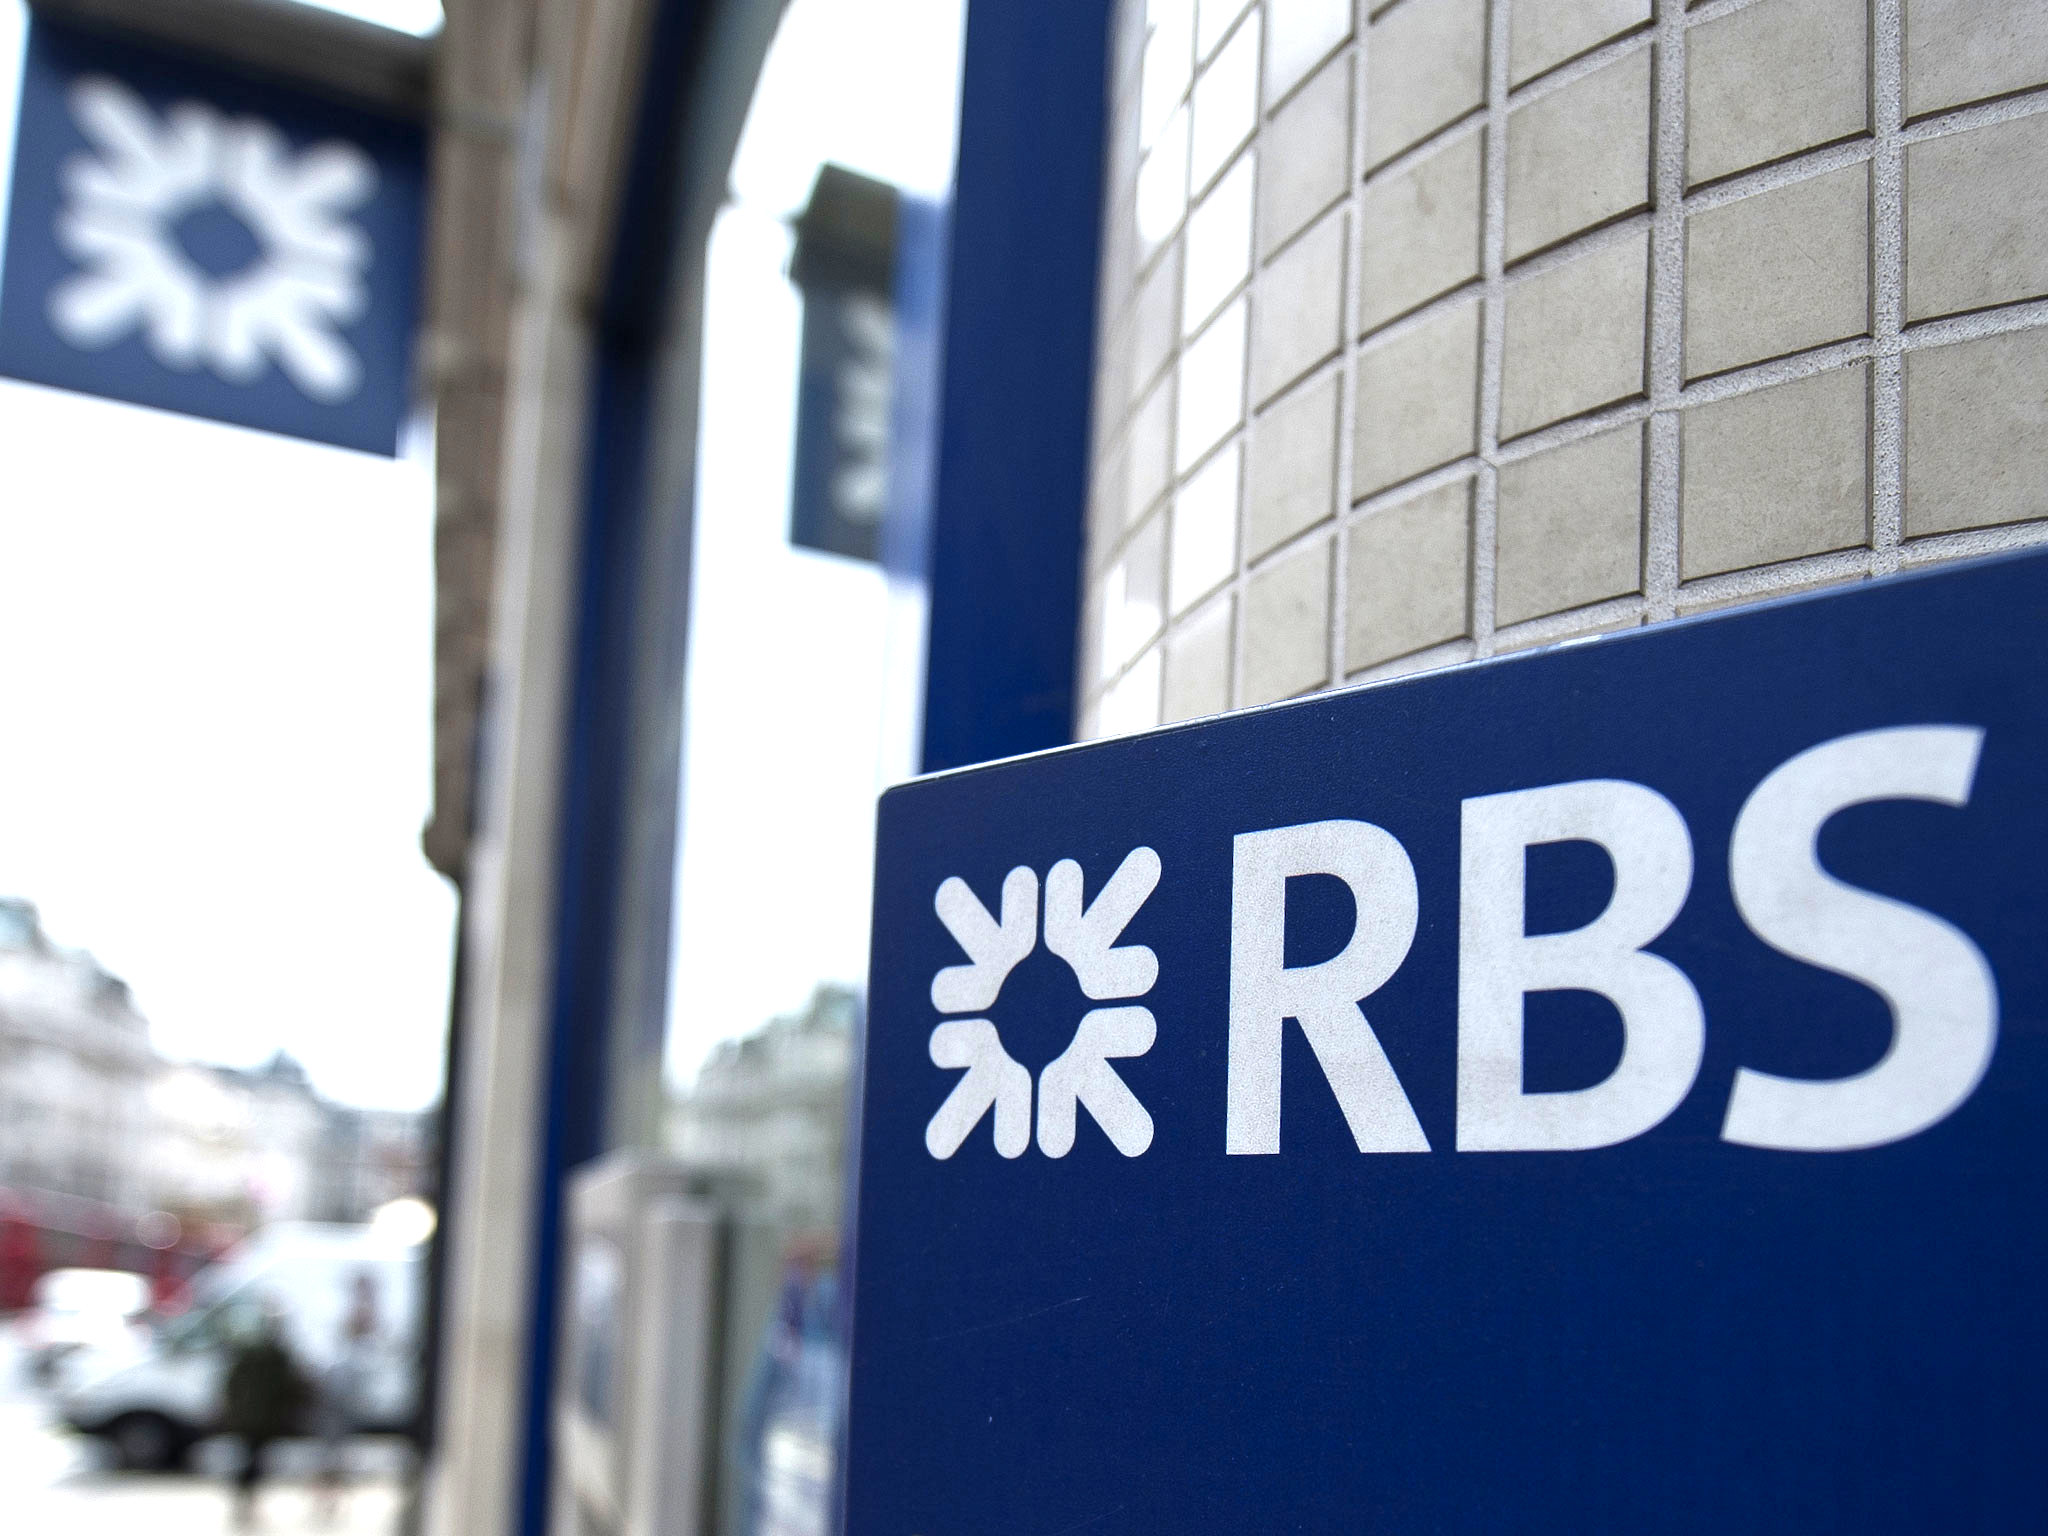 The Serious Fraud Office has confirmed that it is investigating allegations that Royal Bank of Scotland defrauded viable SMEs